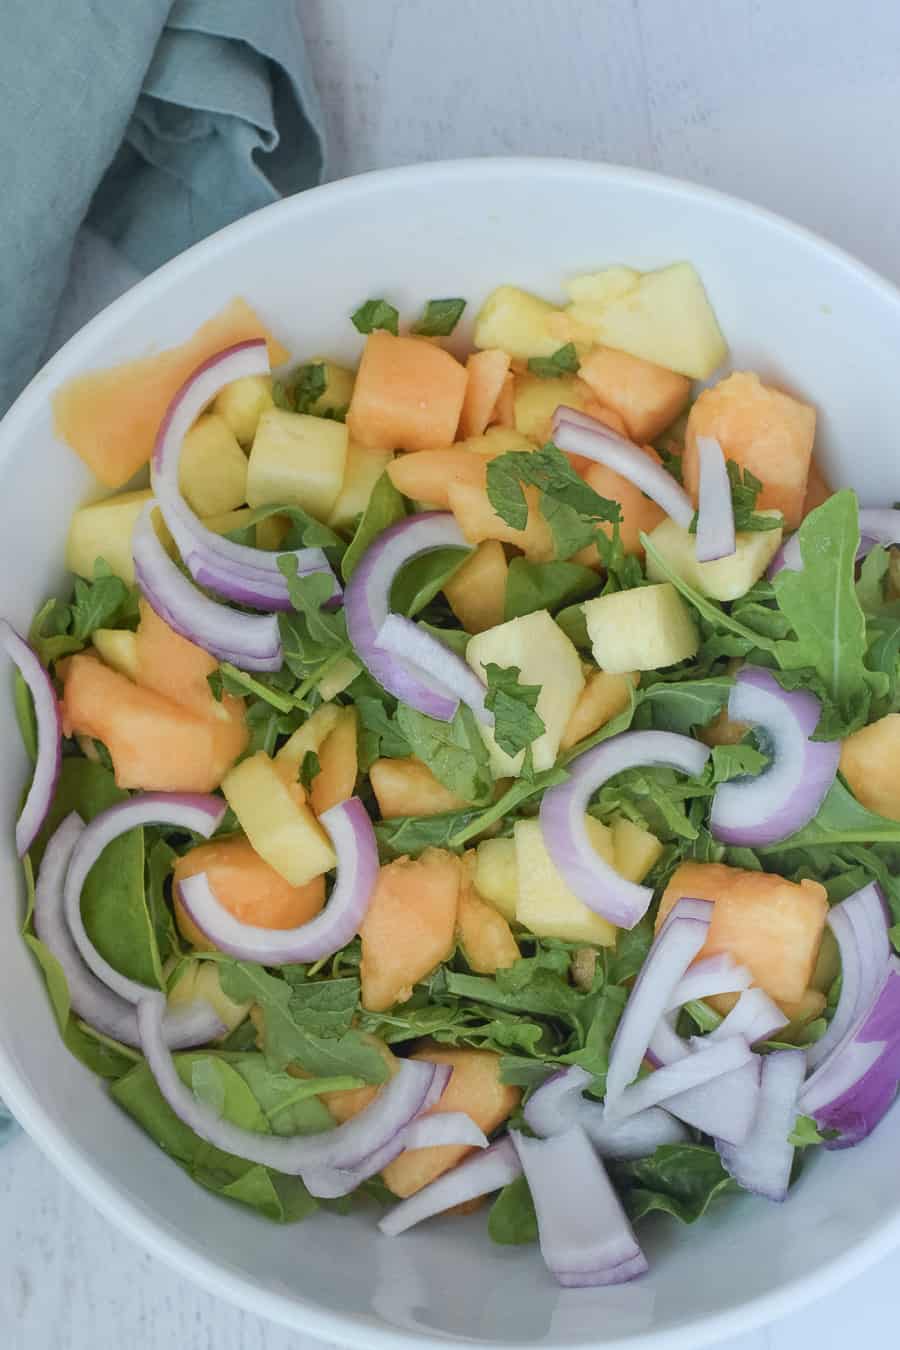 Cantaloupe salad with pineapple and red onion over bed of arugula greens in white salad bowl